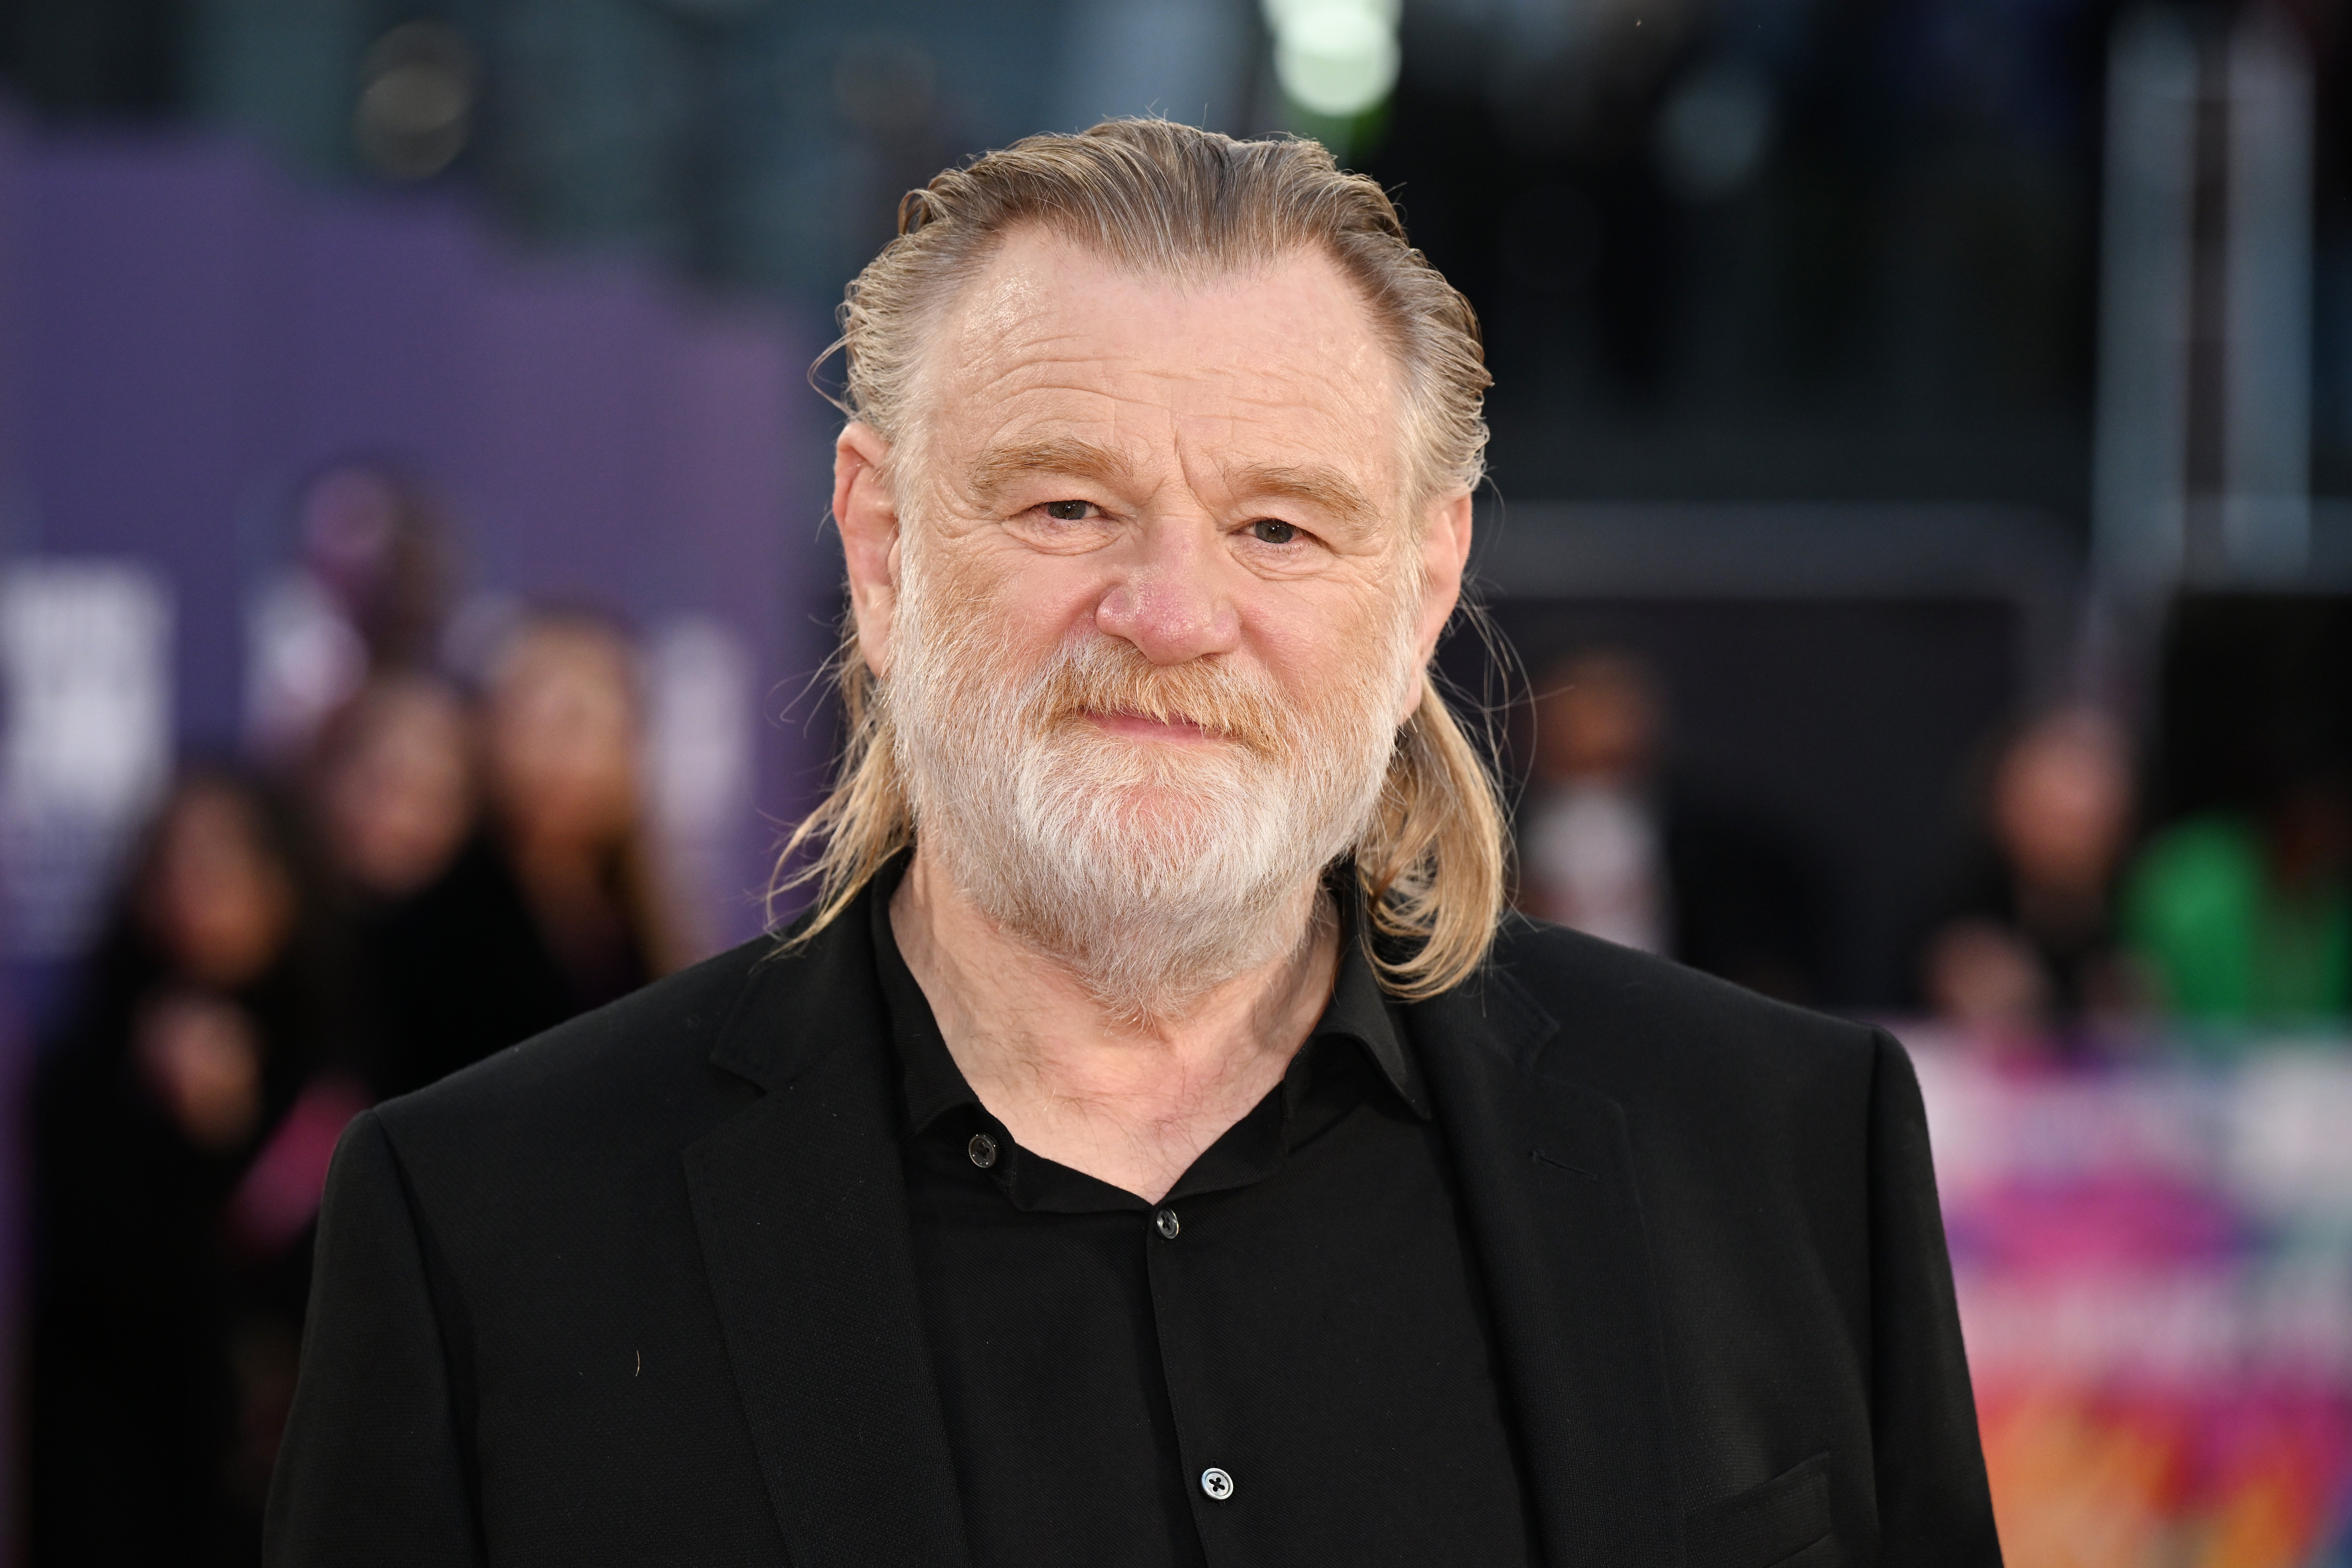 Brendan Gleeson at the UK premiere of "The Banshees of Inisherin" on October 13, 2022, in London | Source: Getty Images